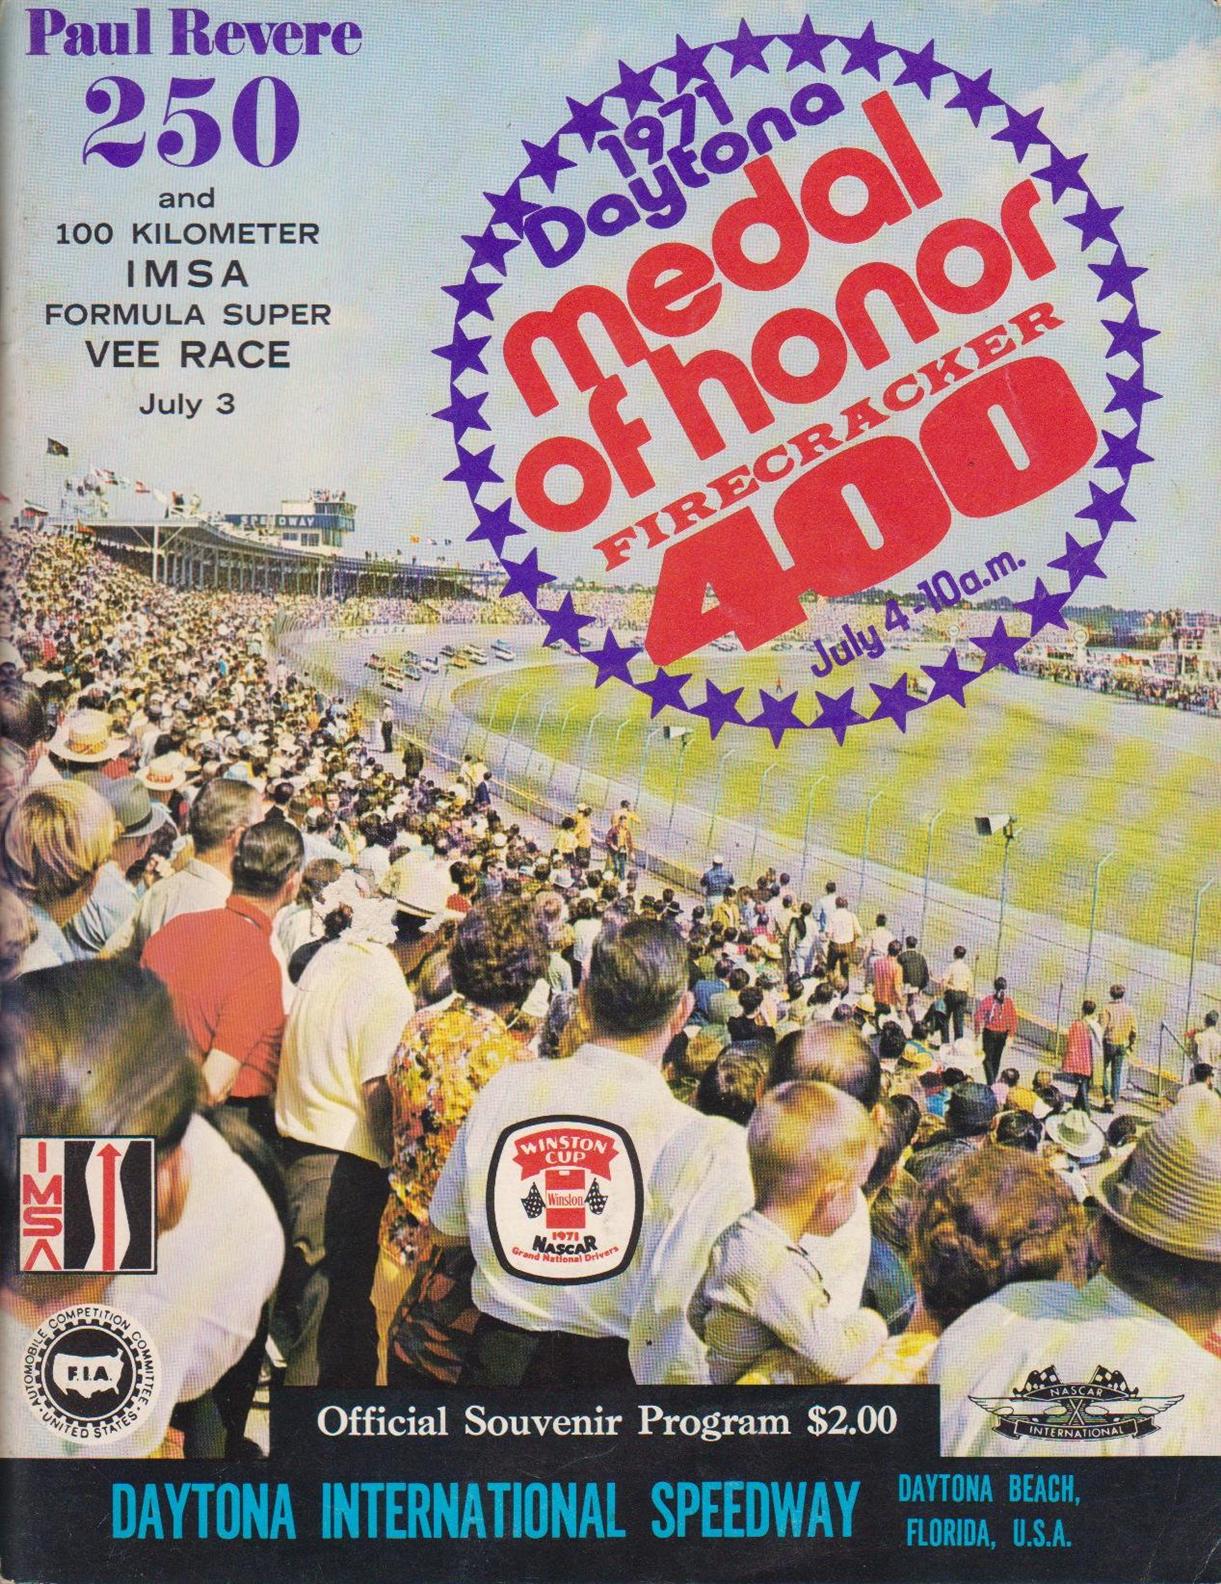 1971 Atlanta 500 - 1971 NASCAR Winston Cup Series (partially found footage and official documents of NASCAR races; 1971)